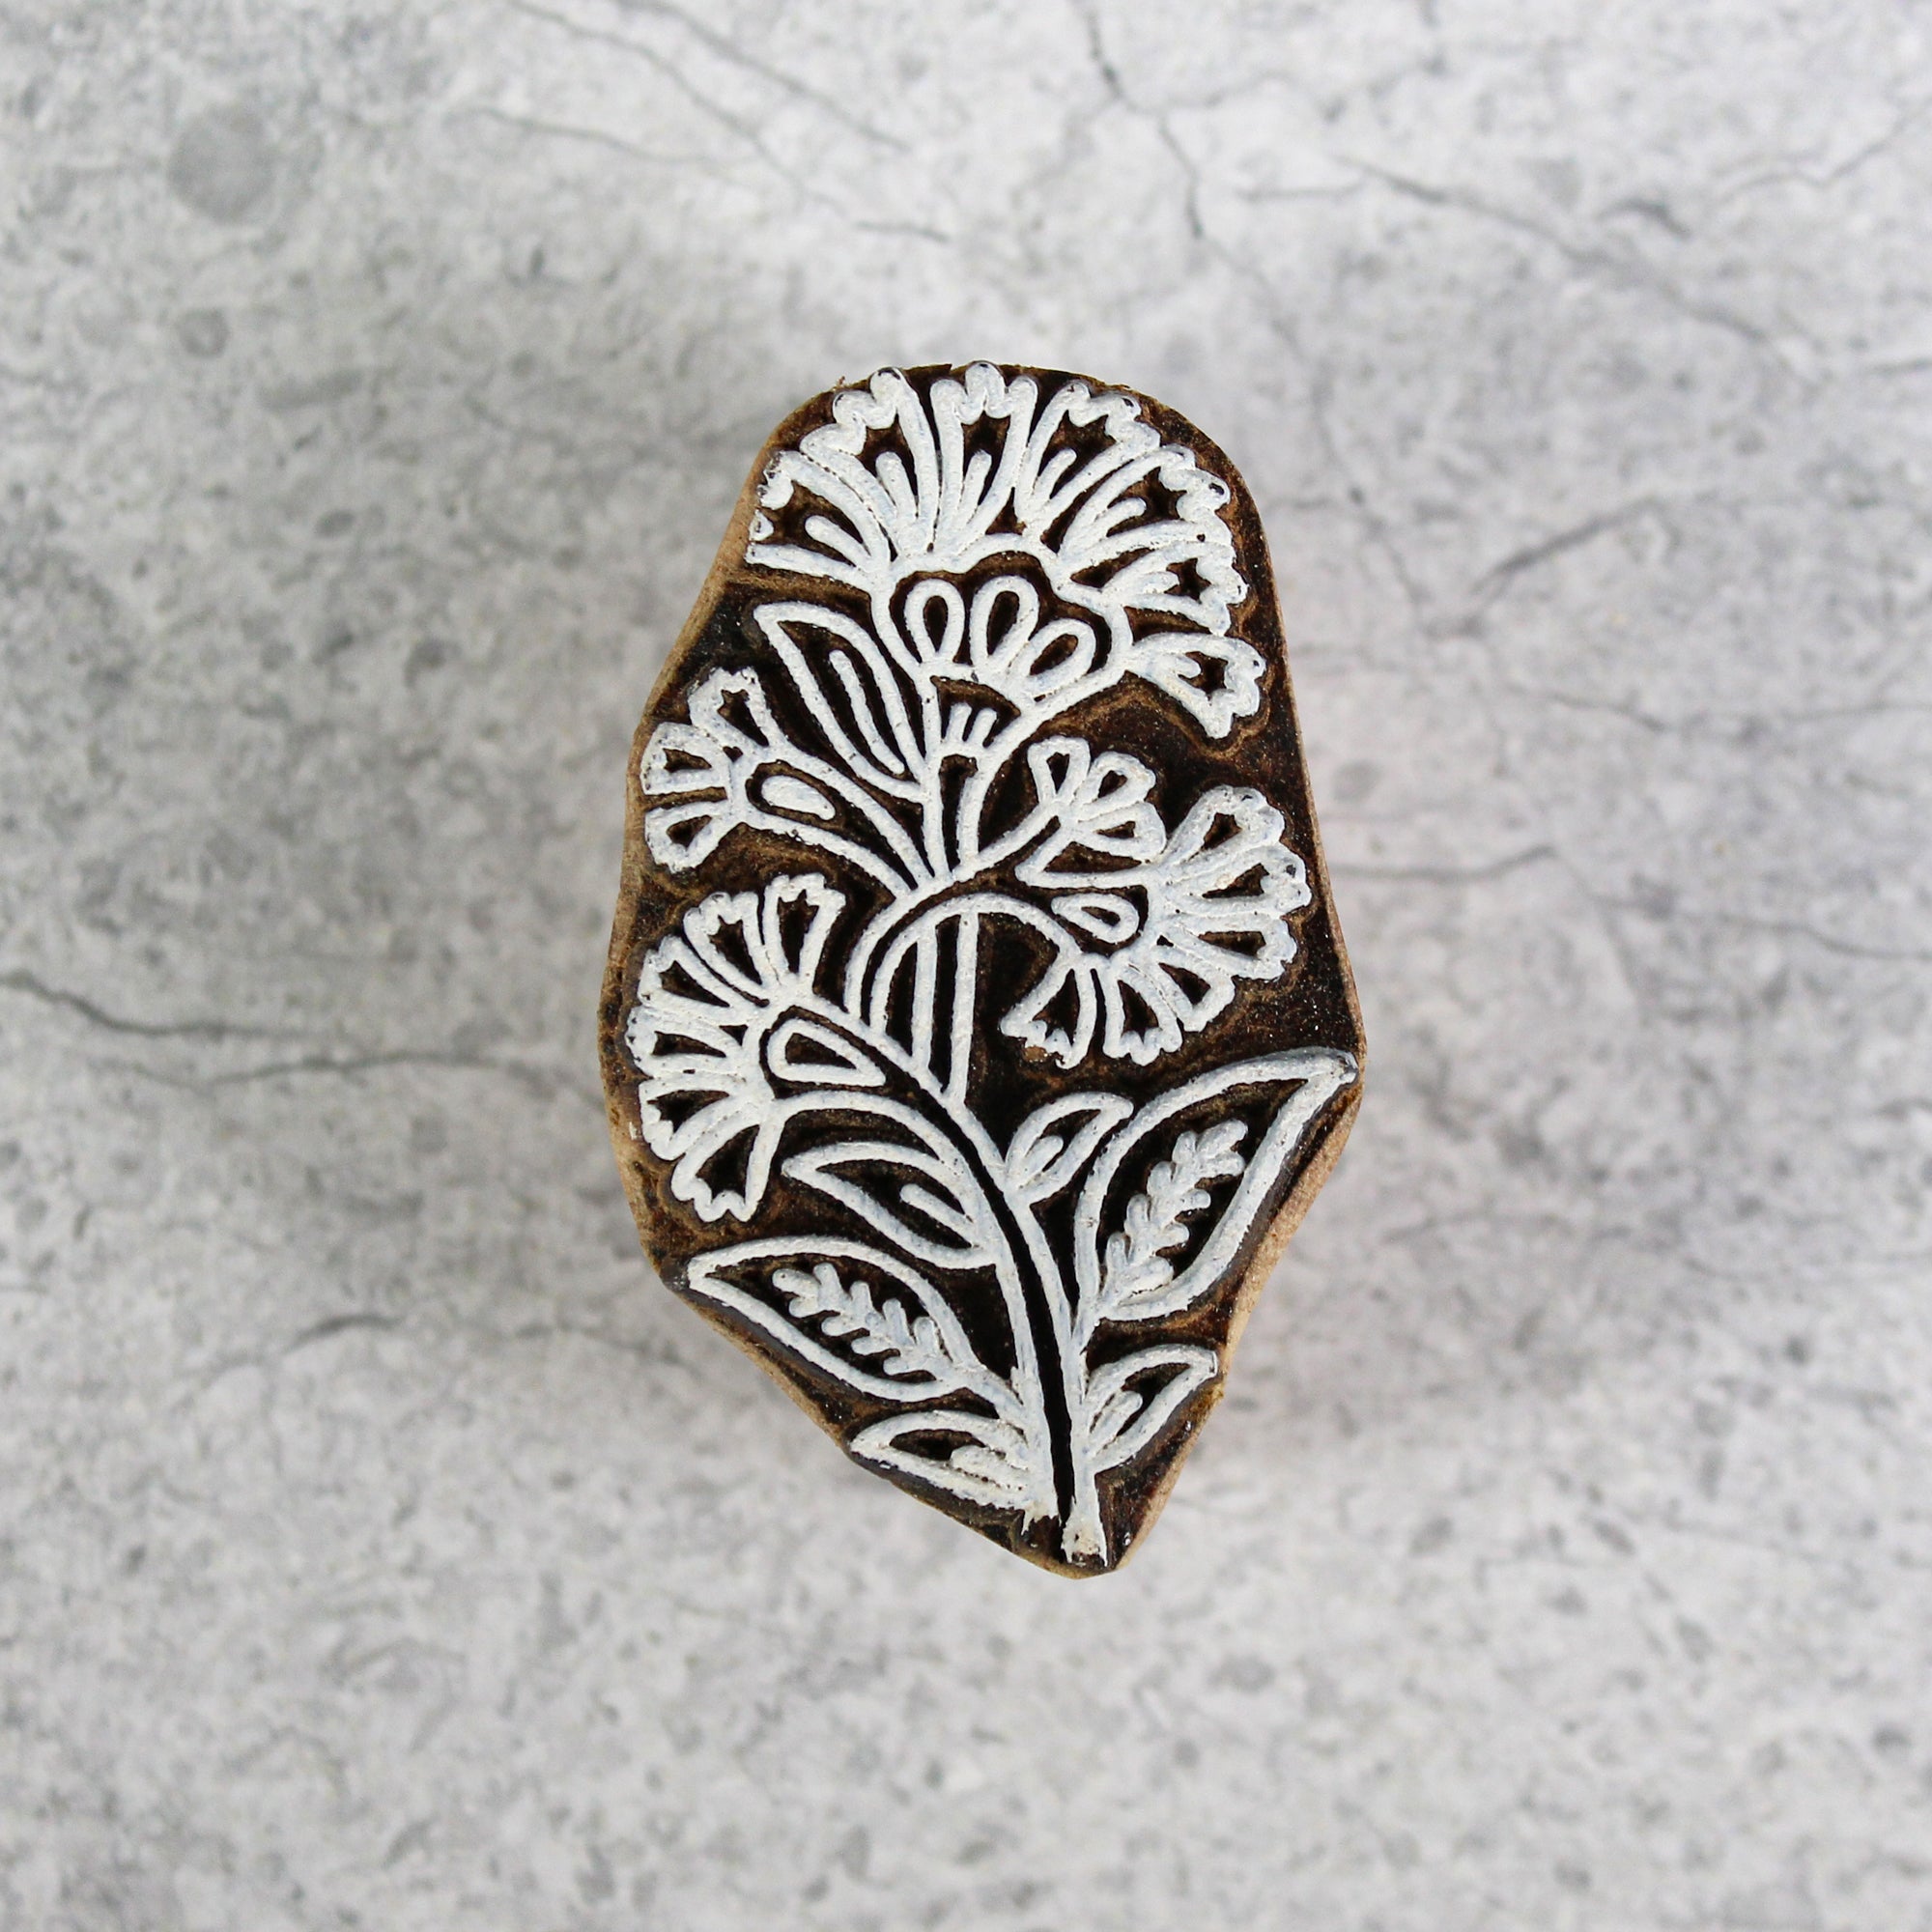 Hand Carved Wooden Printing Block Meadow Blossom W 1.25inch X L 2inch 1pc